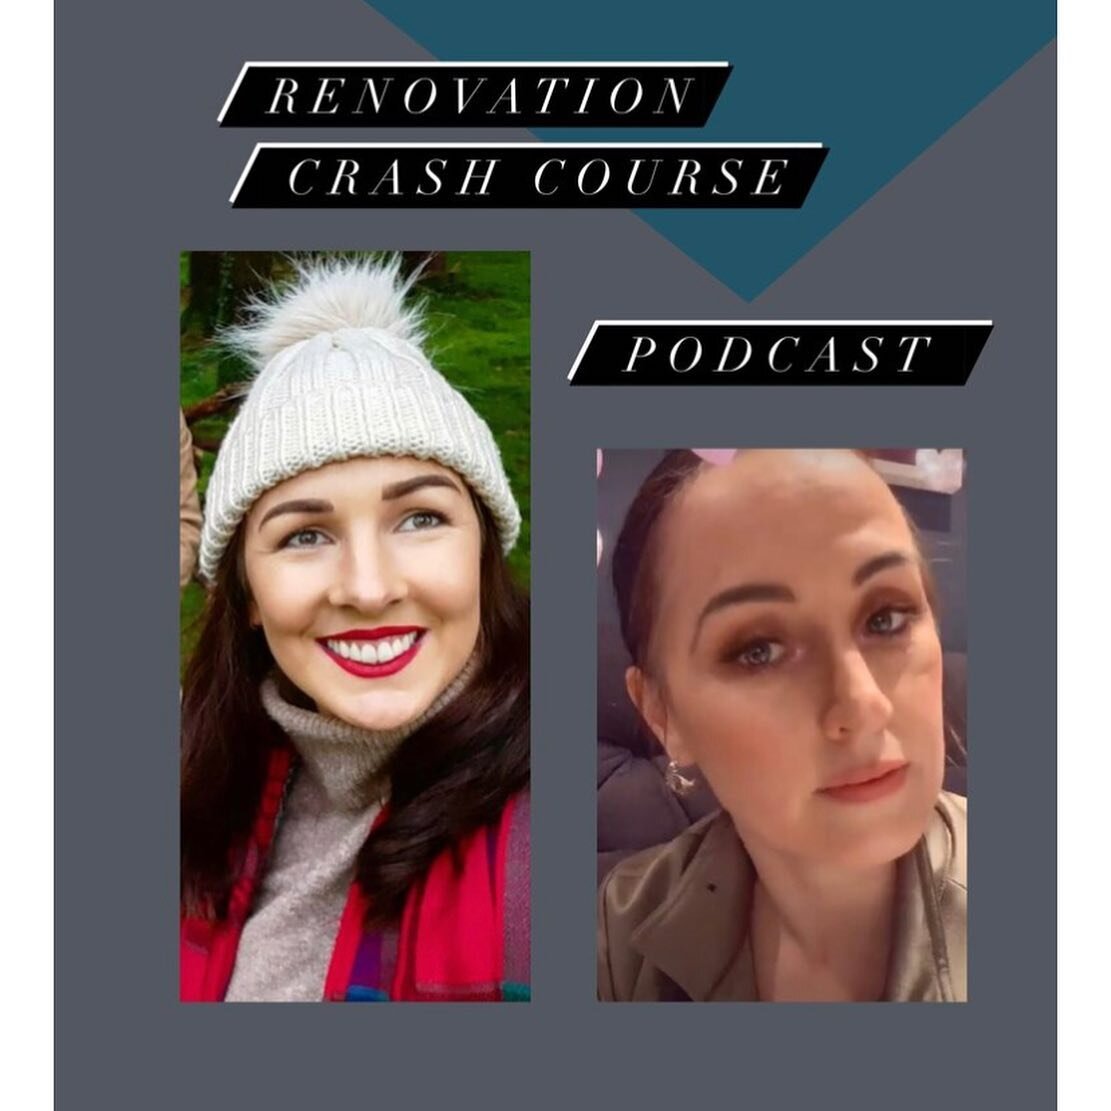 A chat with Aisling from @westofirelandselfbuild that was made for our #RenovationCrashCourse is now available on the website! 
Have a listen for all things home building. 
Aisling tells us what she learned during the process of building her beautifu